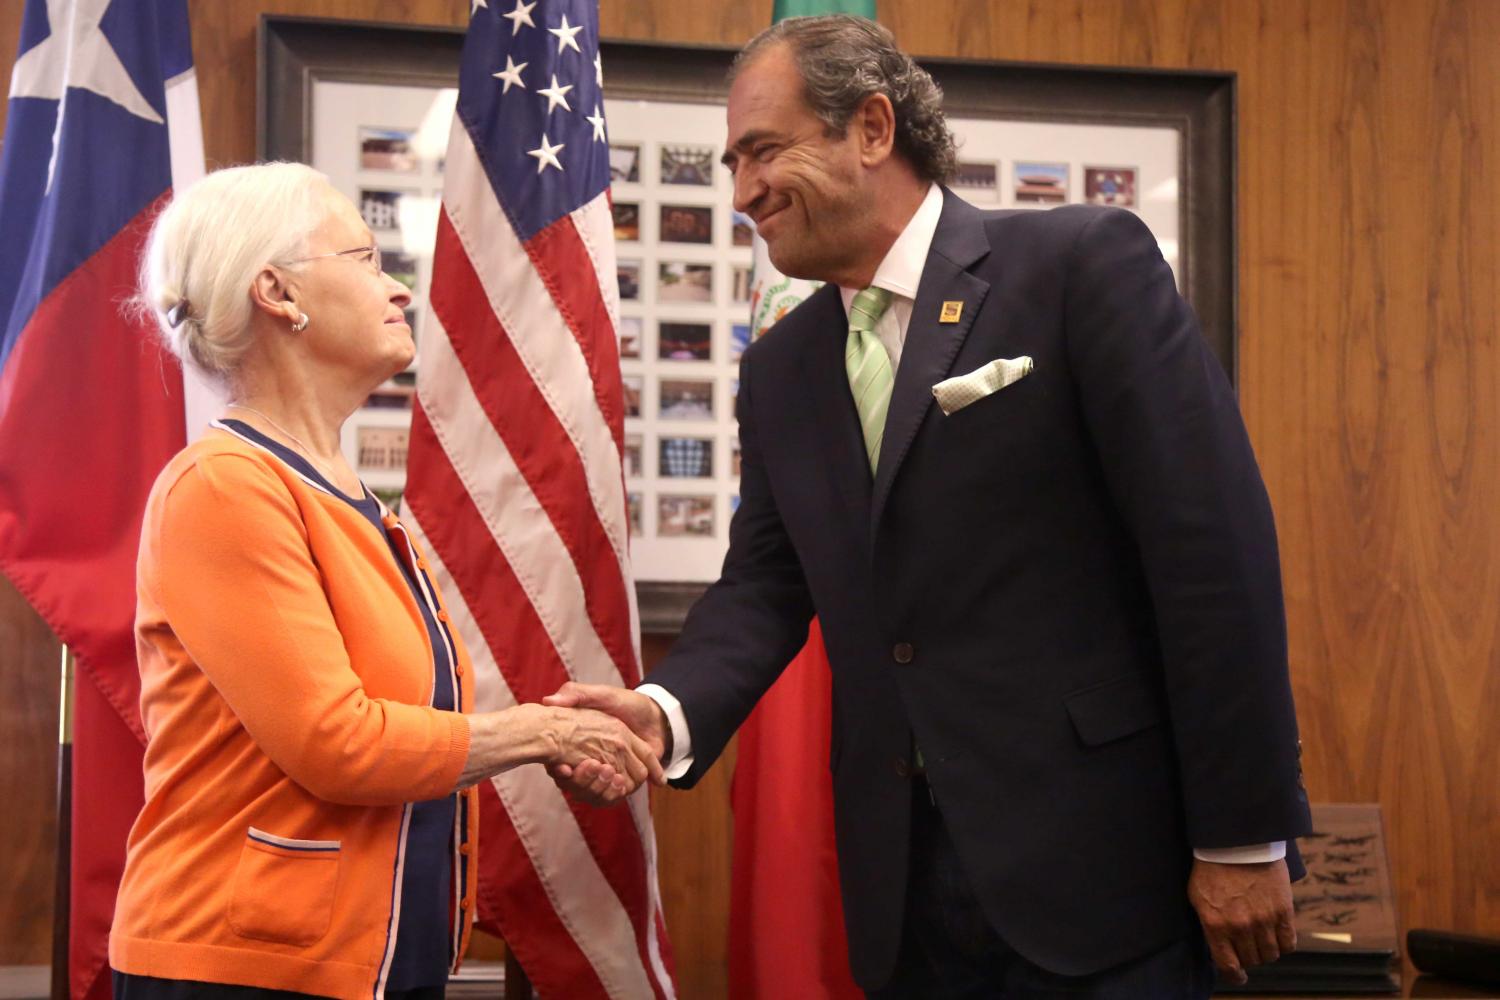 UTEP and FECHAC hope to help inform potential Mexican international students